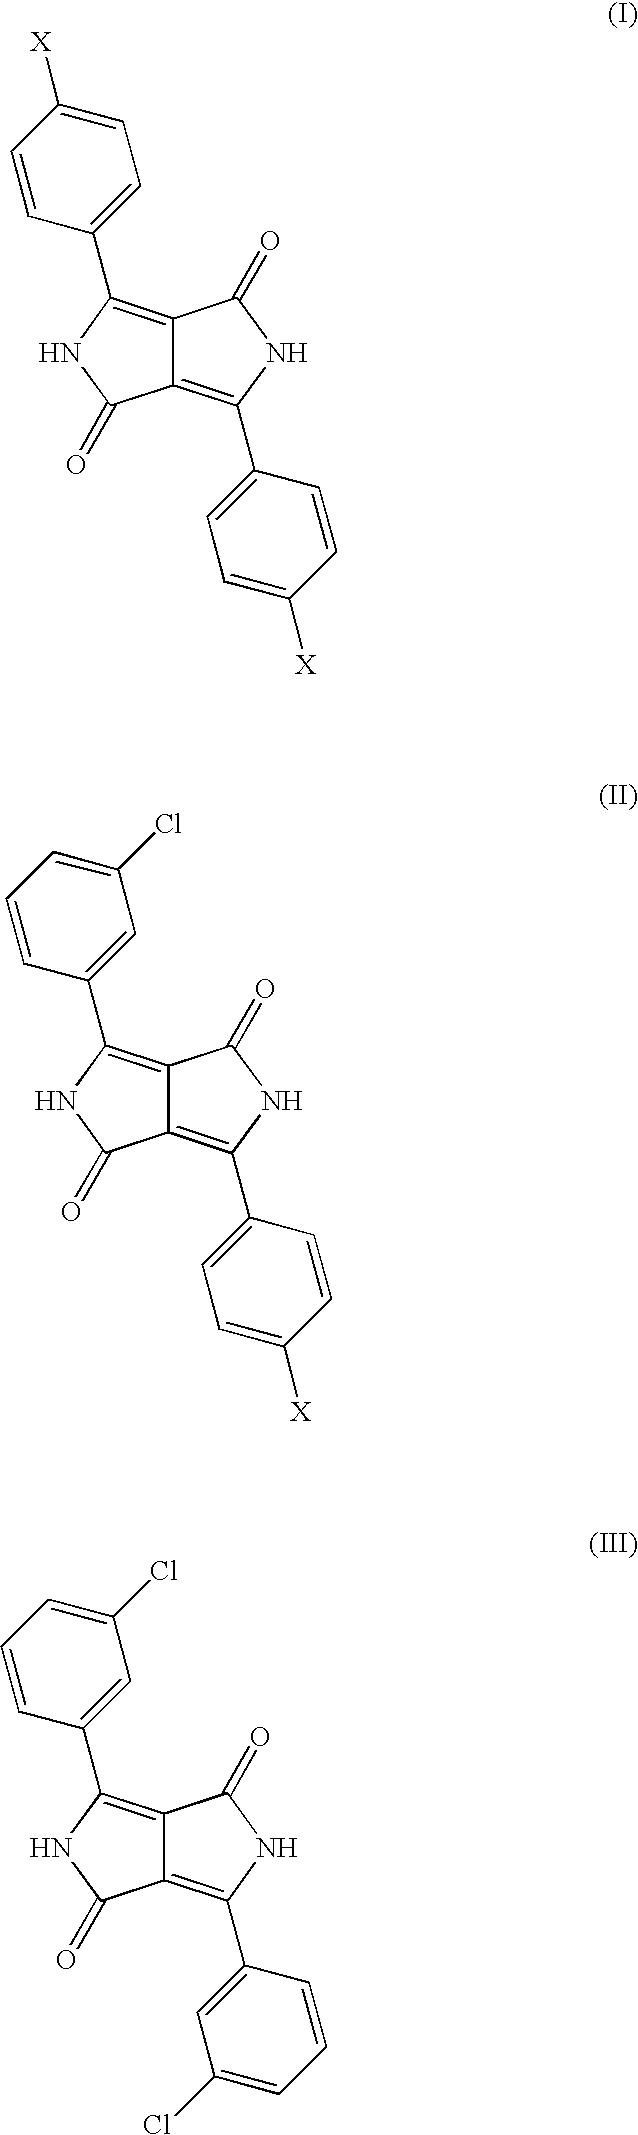 Diketopyrrolopyrrole Cocrystals With High Transparency